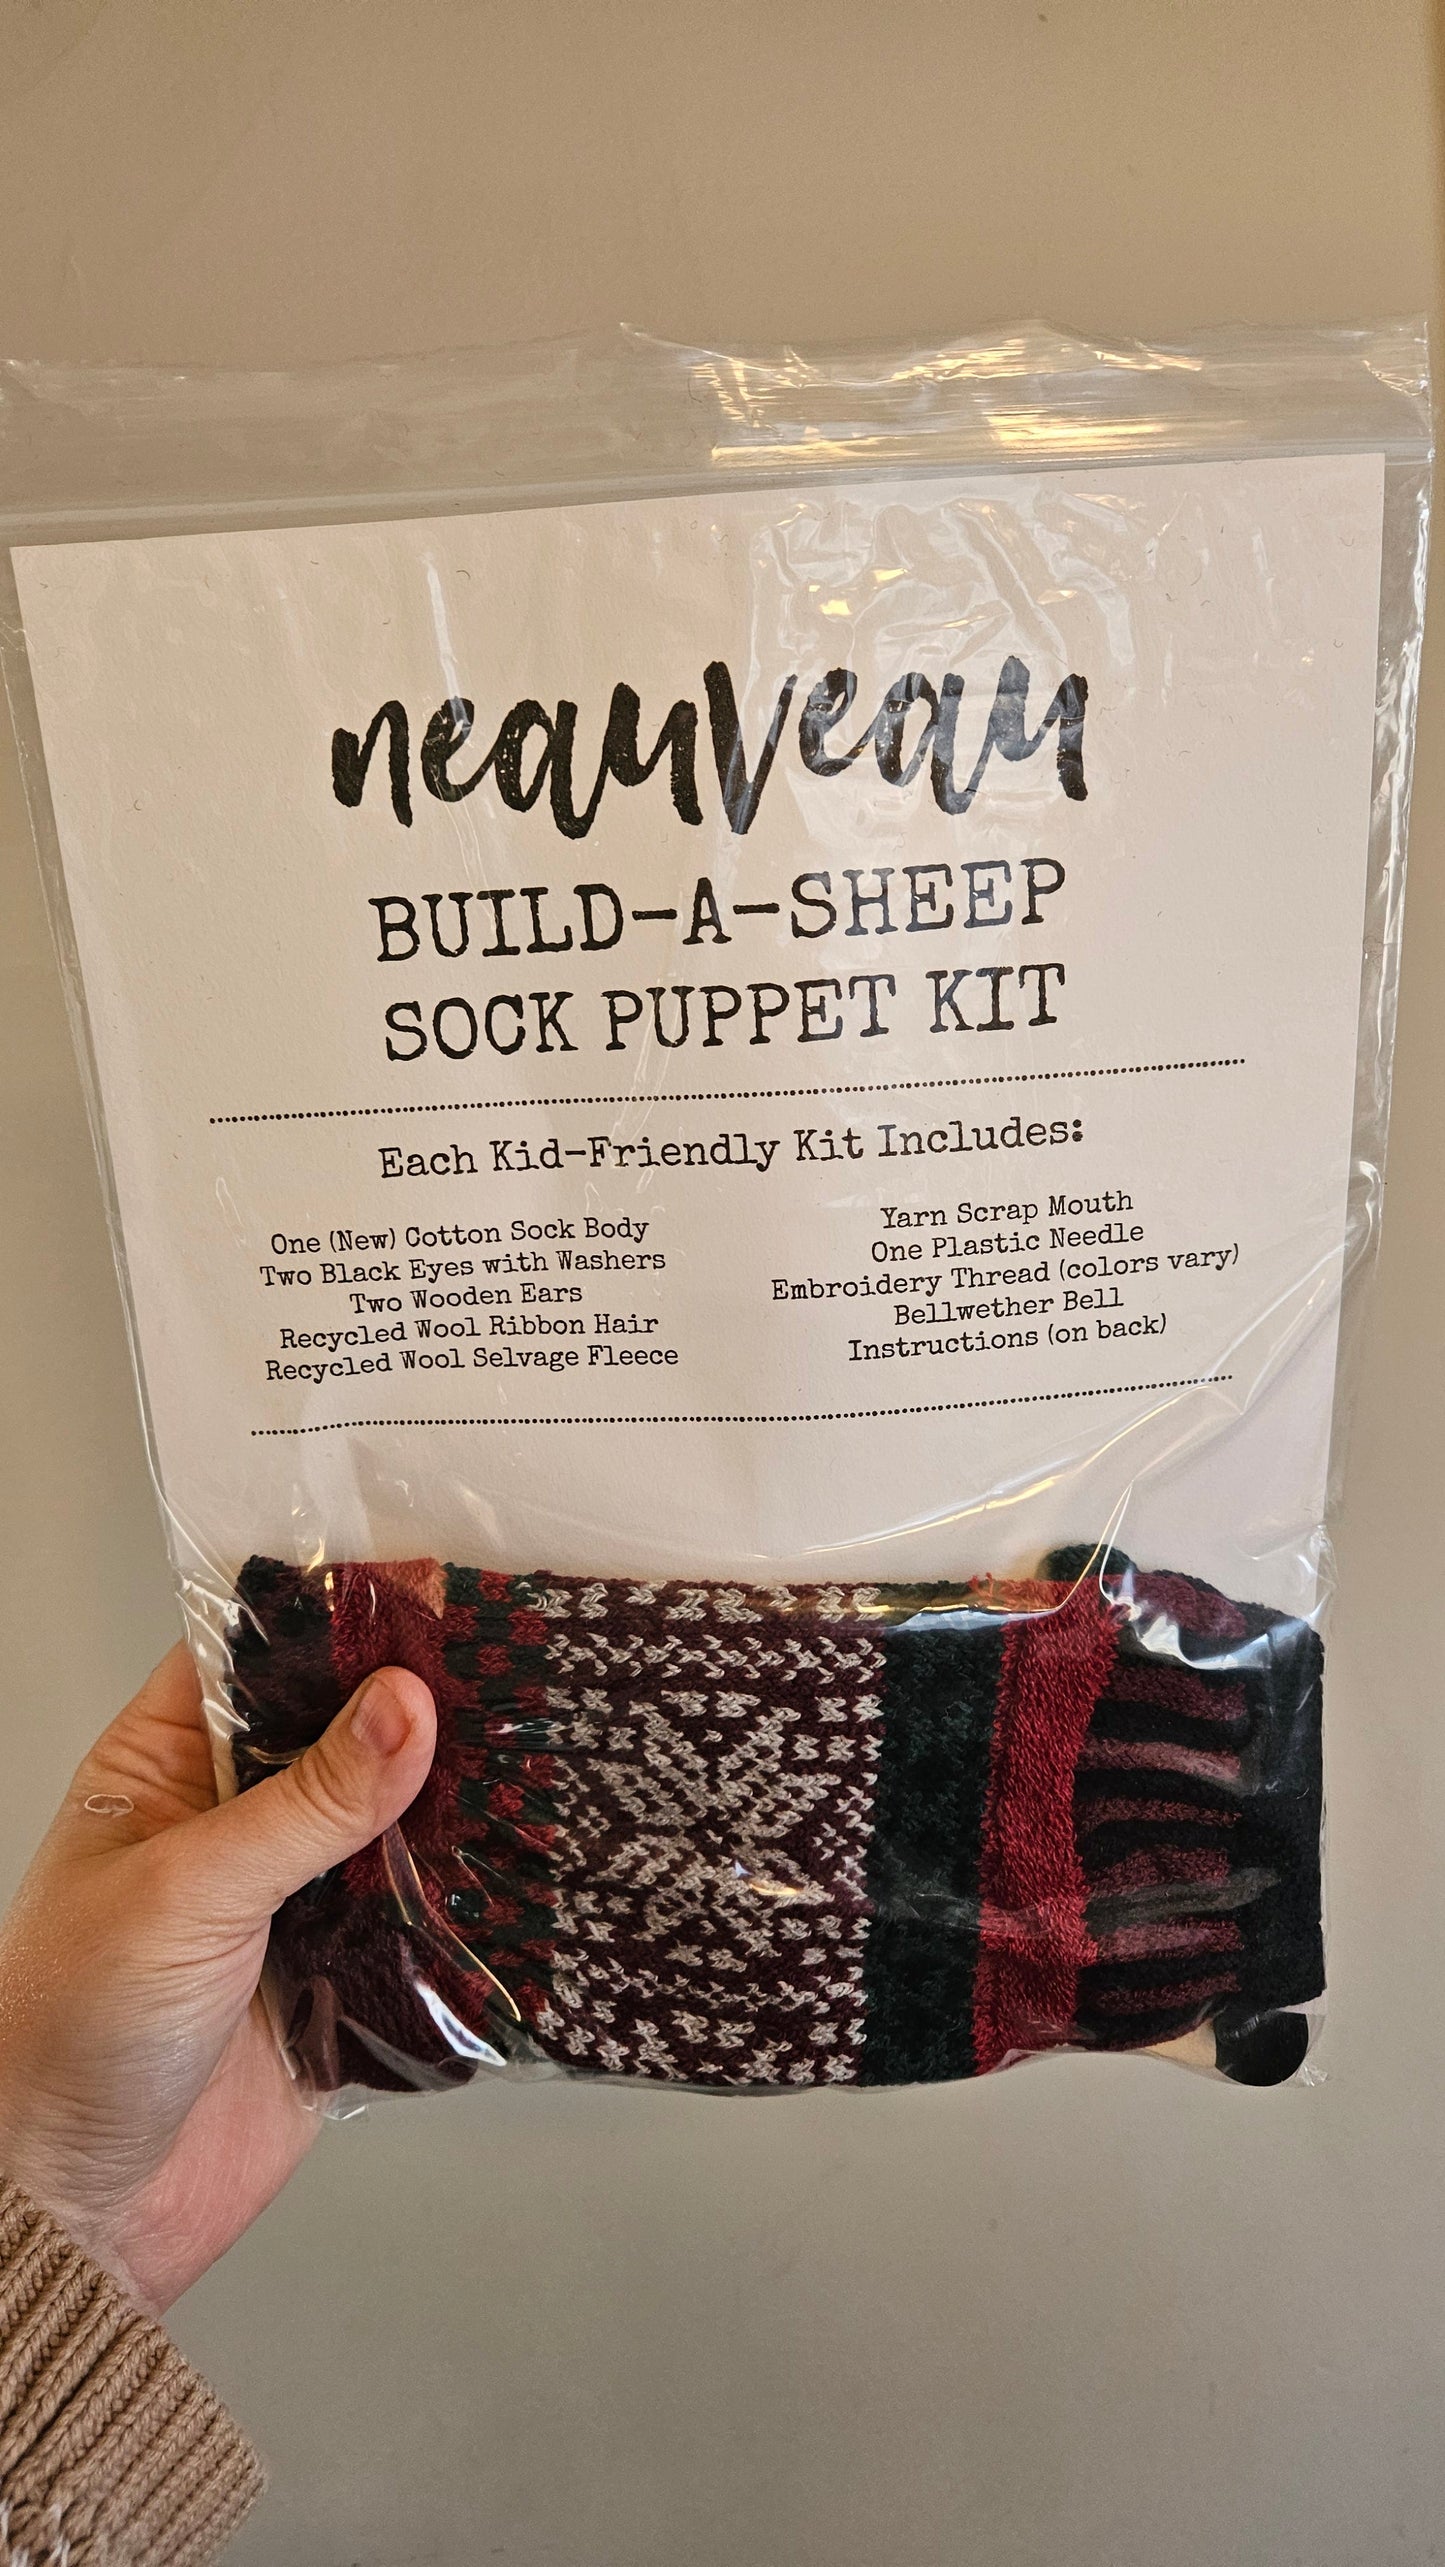 Build-A-Sheep Solmate Sock Puppet Kit - Squirrely Sheep